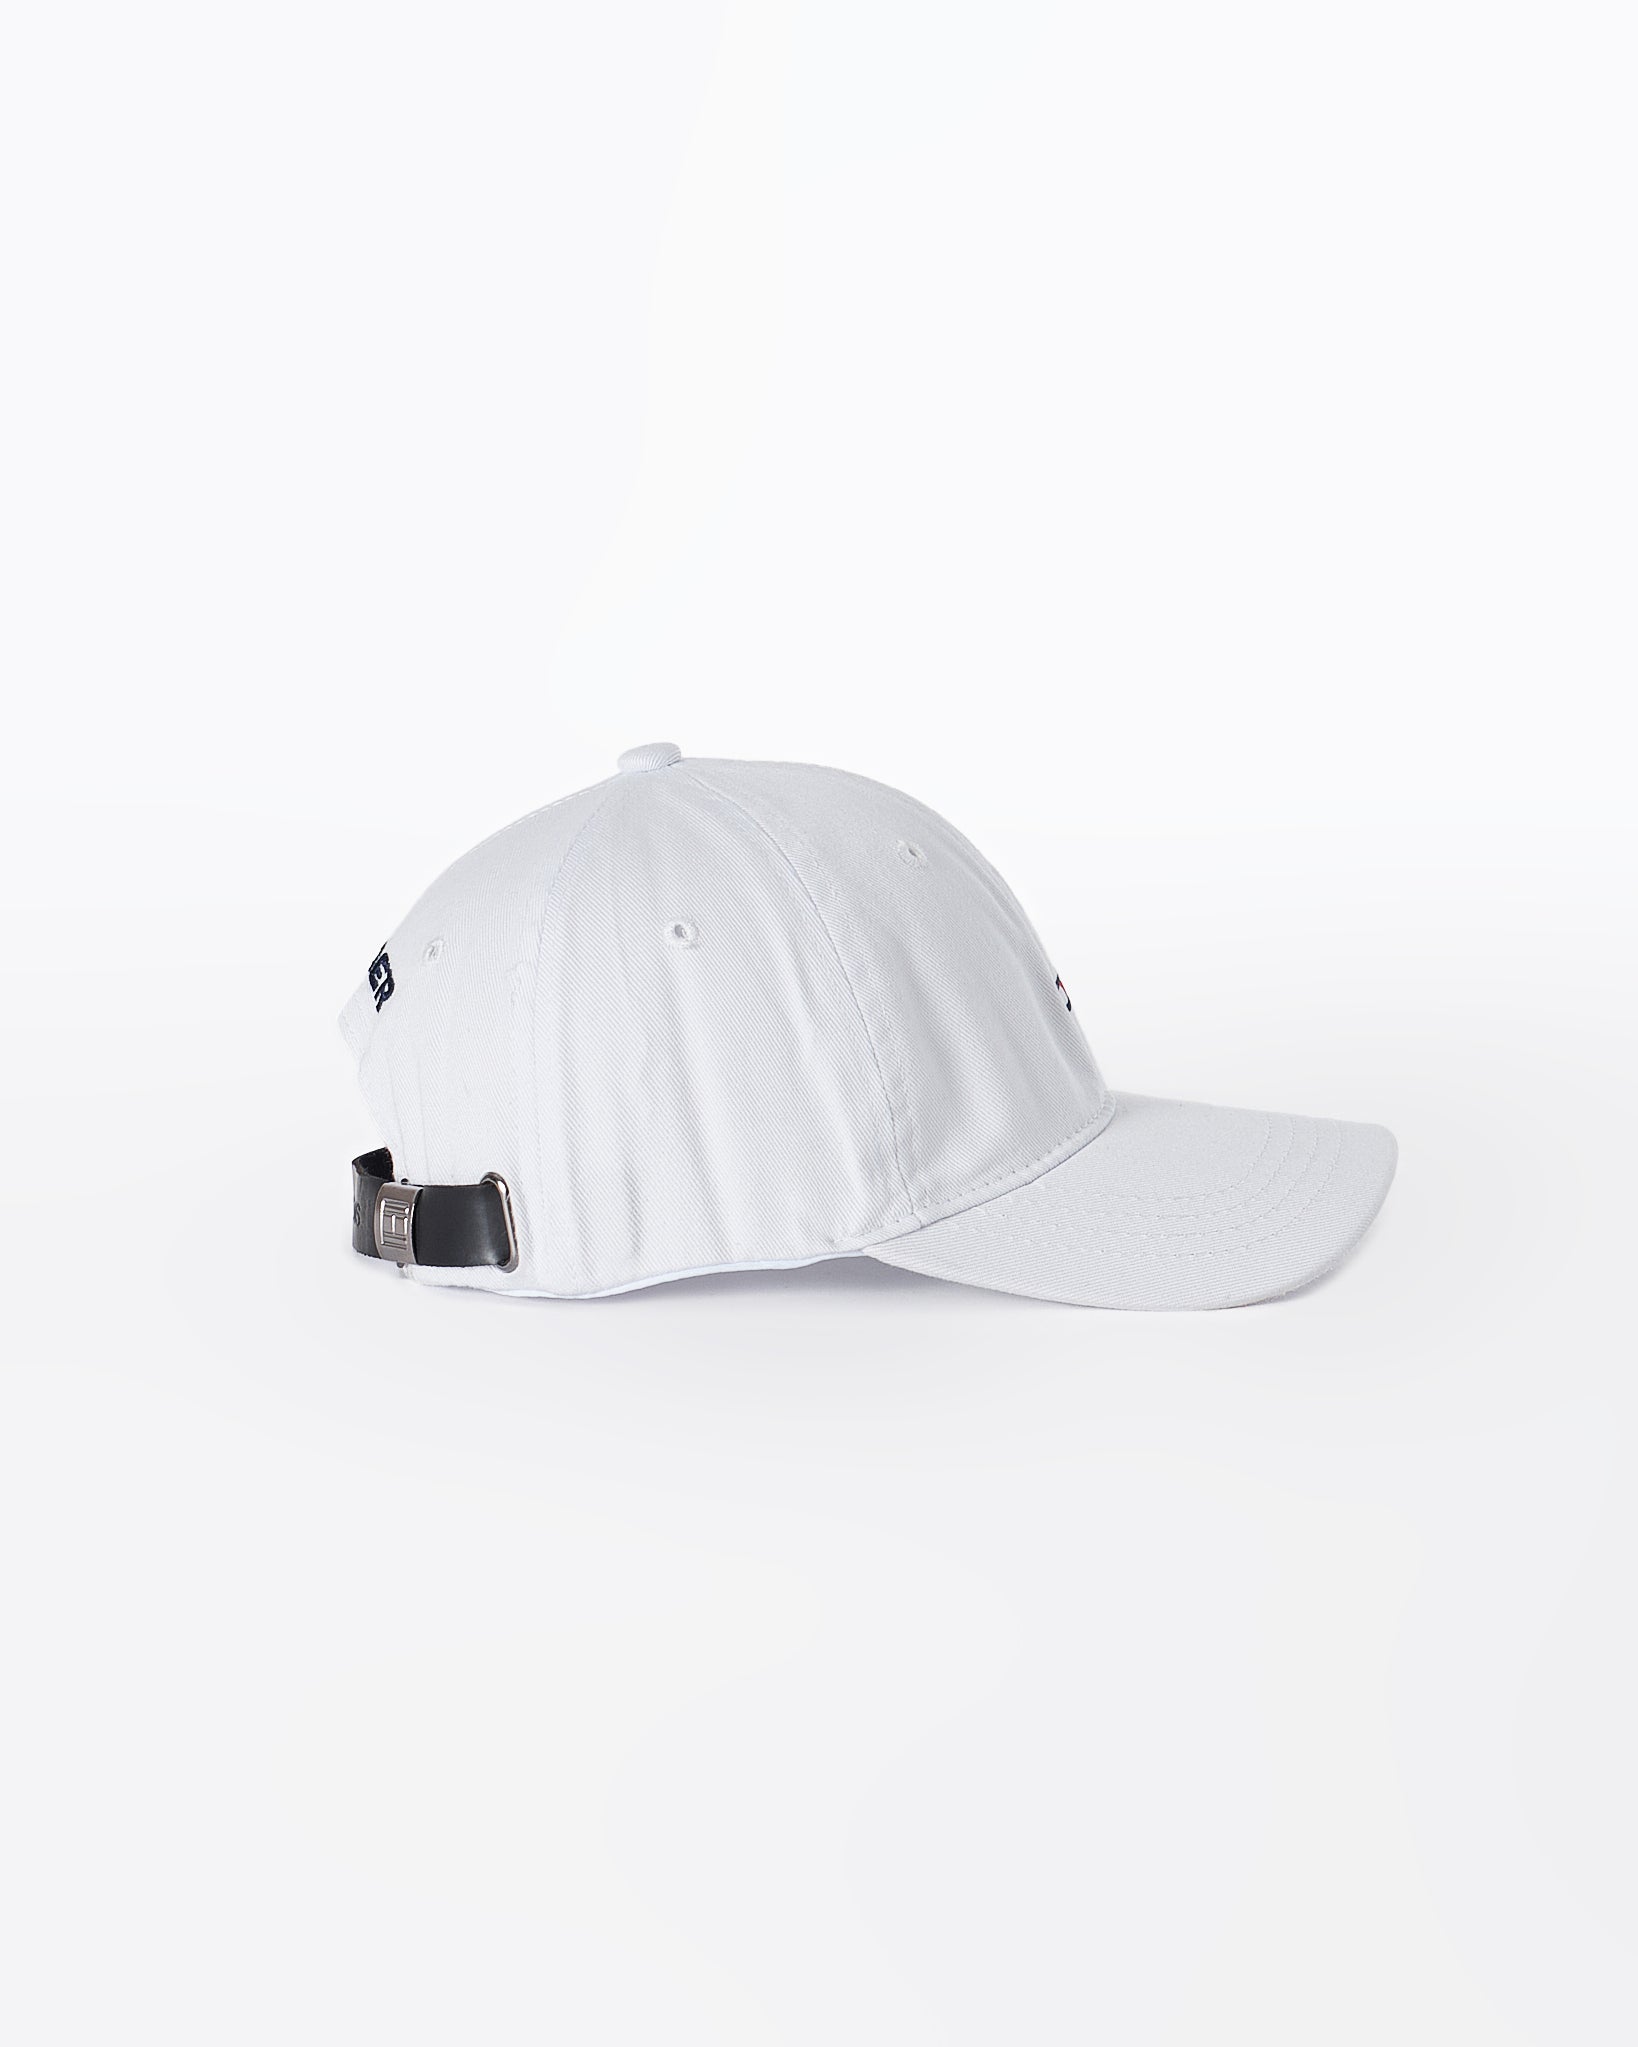 MOI OUTFIT-Tommy White Cap 11.90